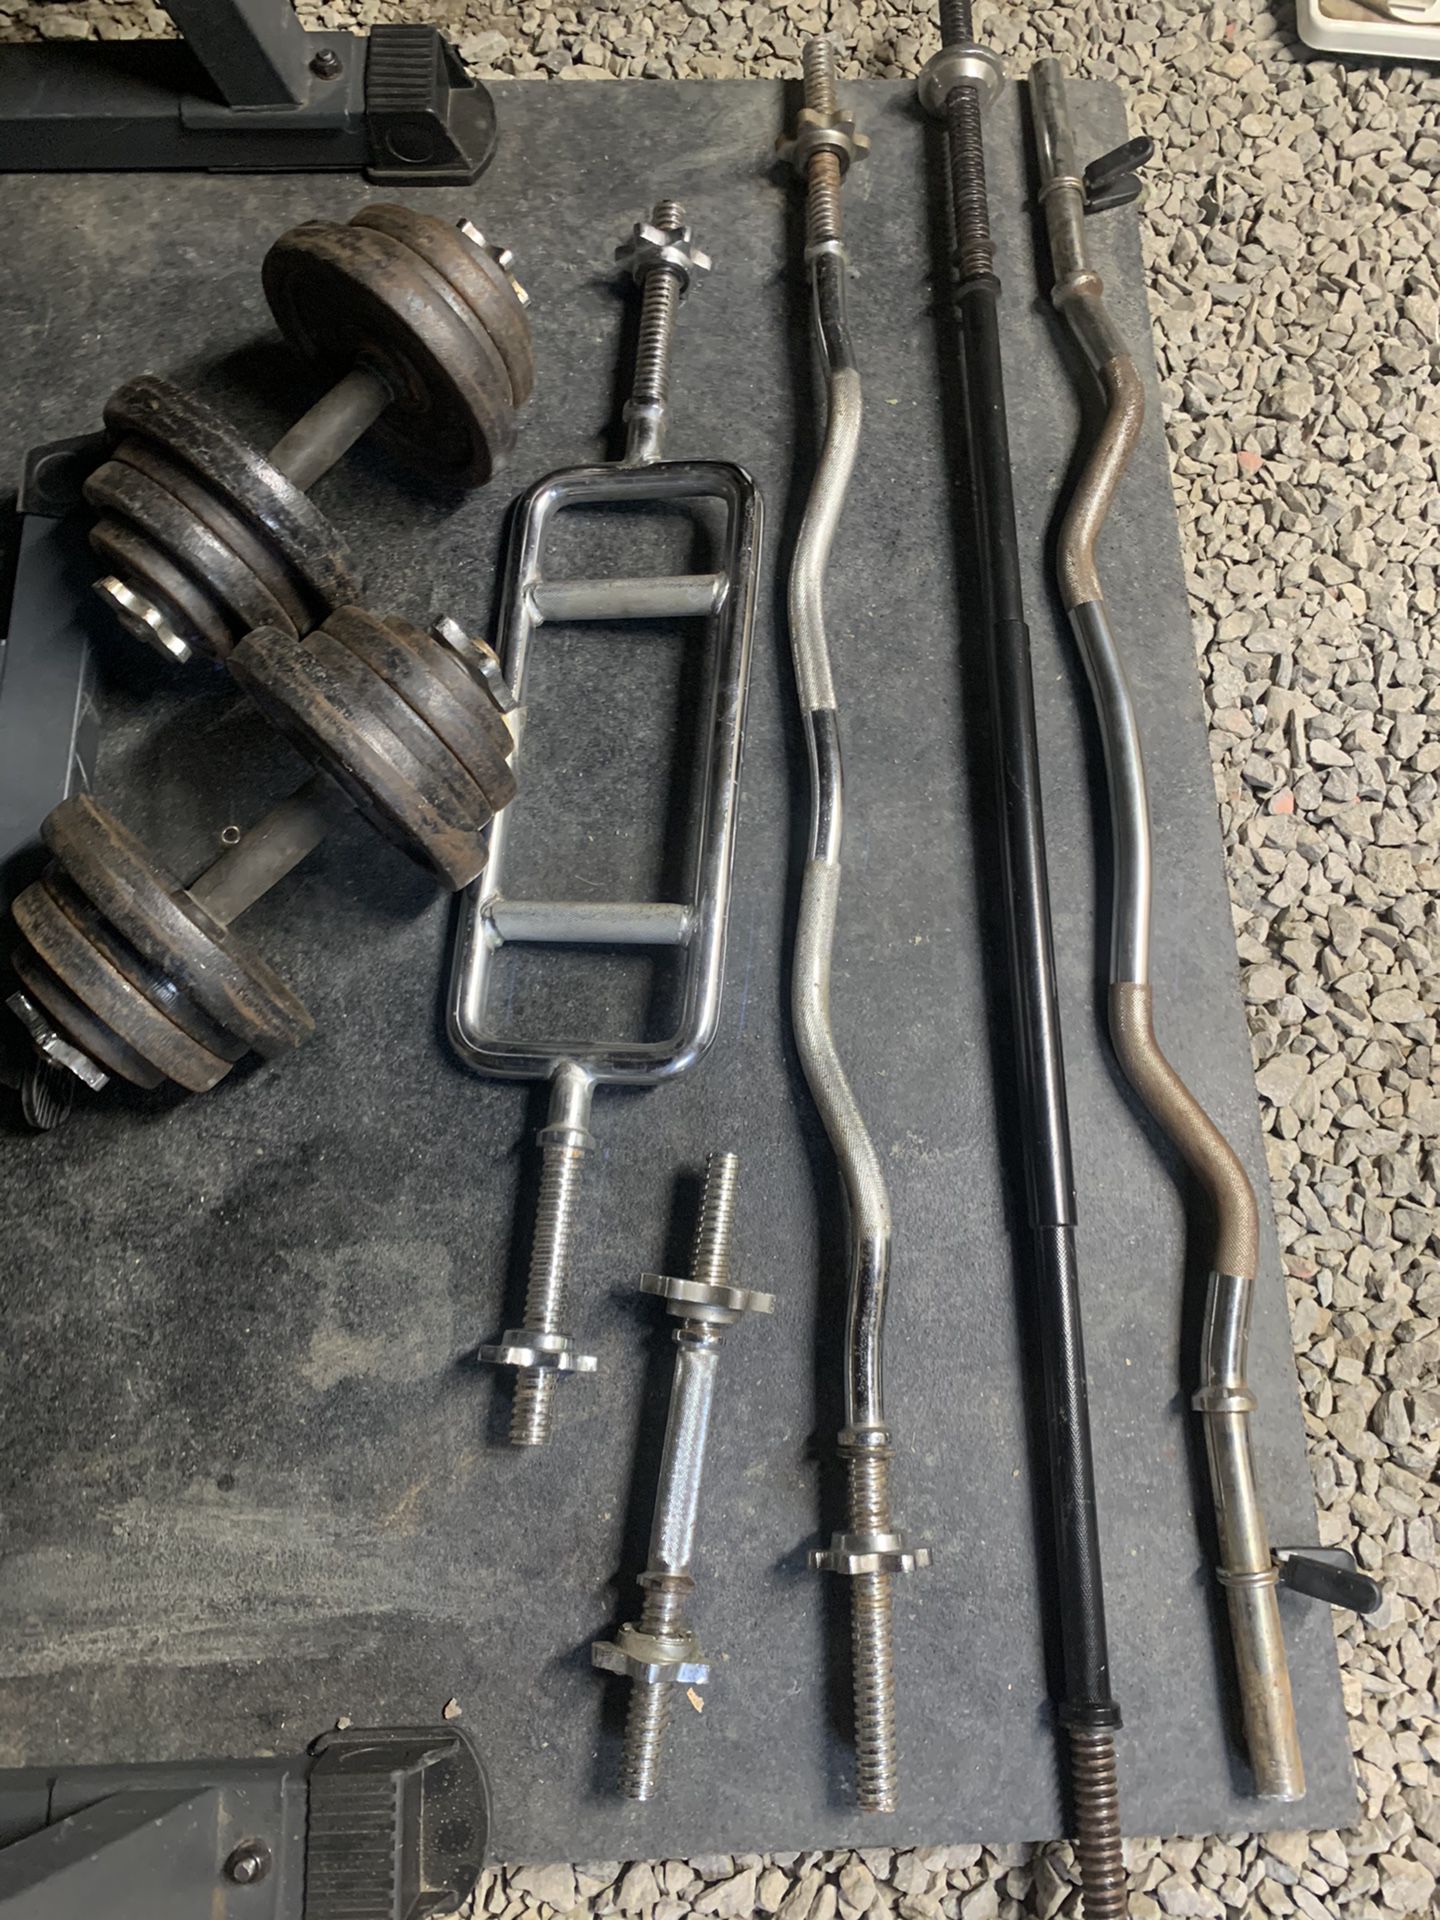 Standard weights and bars